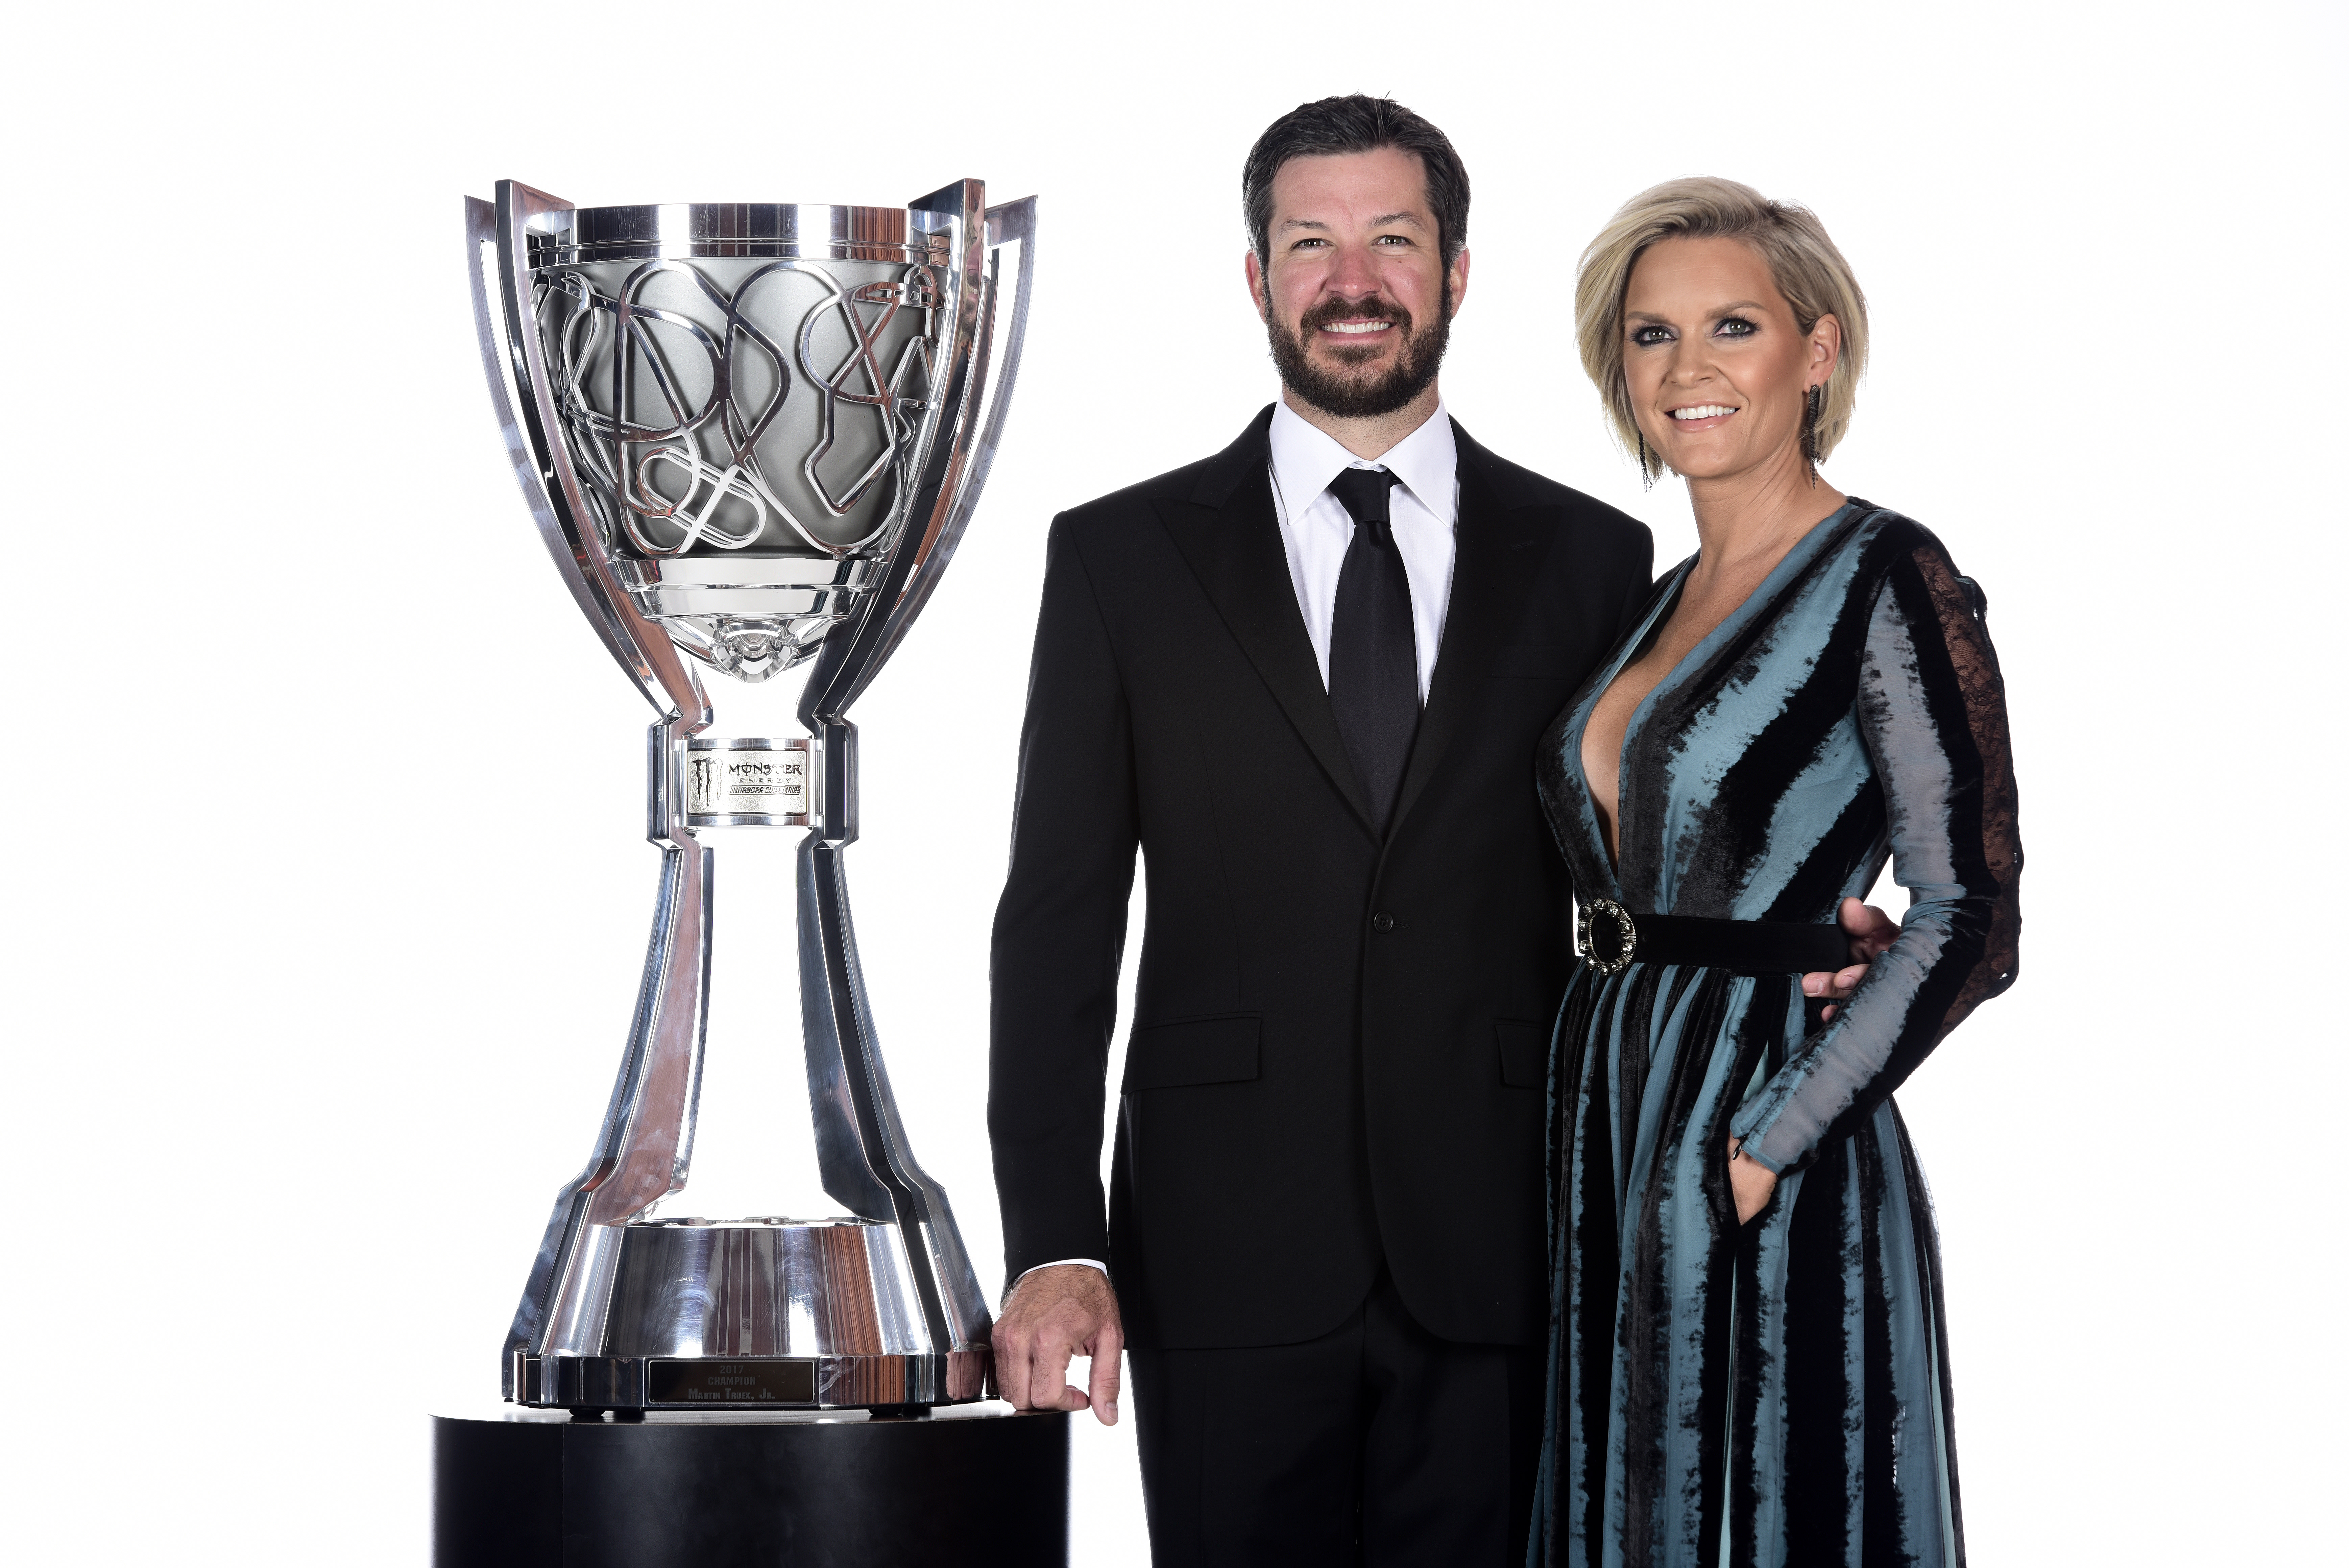 Martin Lee Truex Jr. and Sherry Pollex at the Monster Energy NASCAR Cup Series awards on November 30, 2017, in Las Vegas | Source: Getty Images